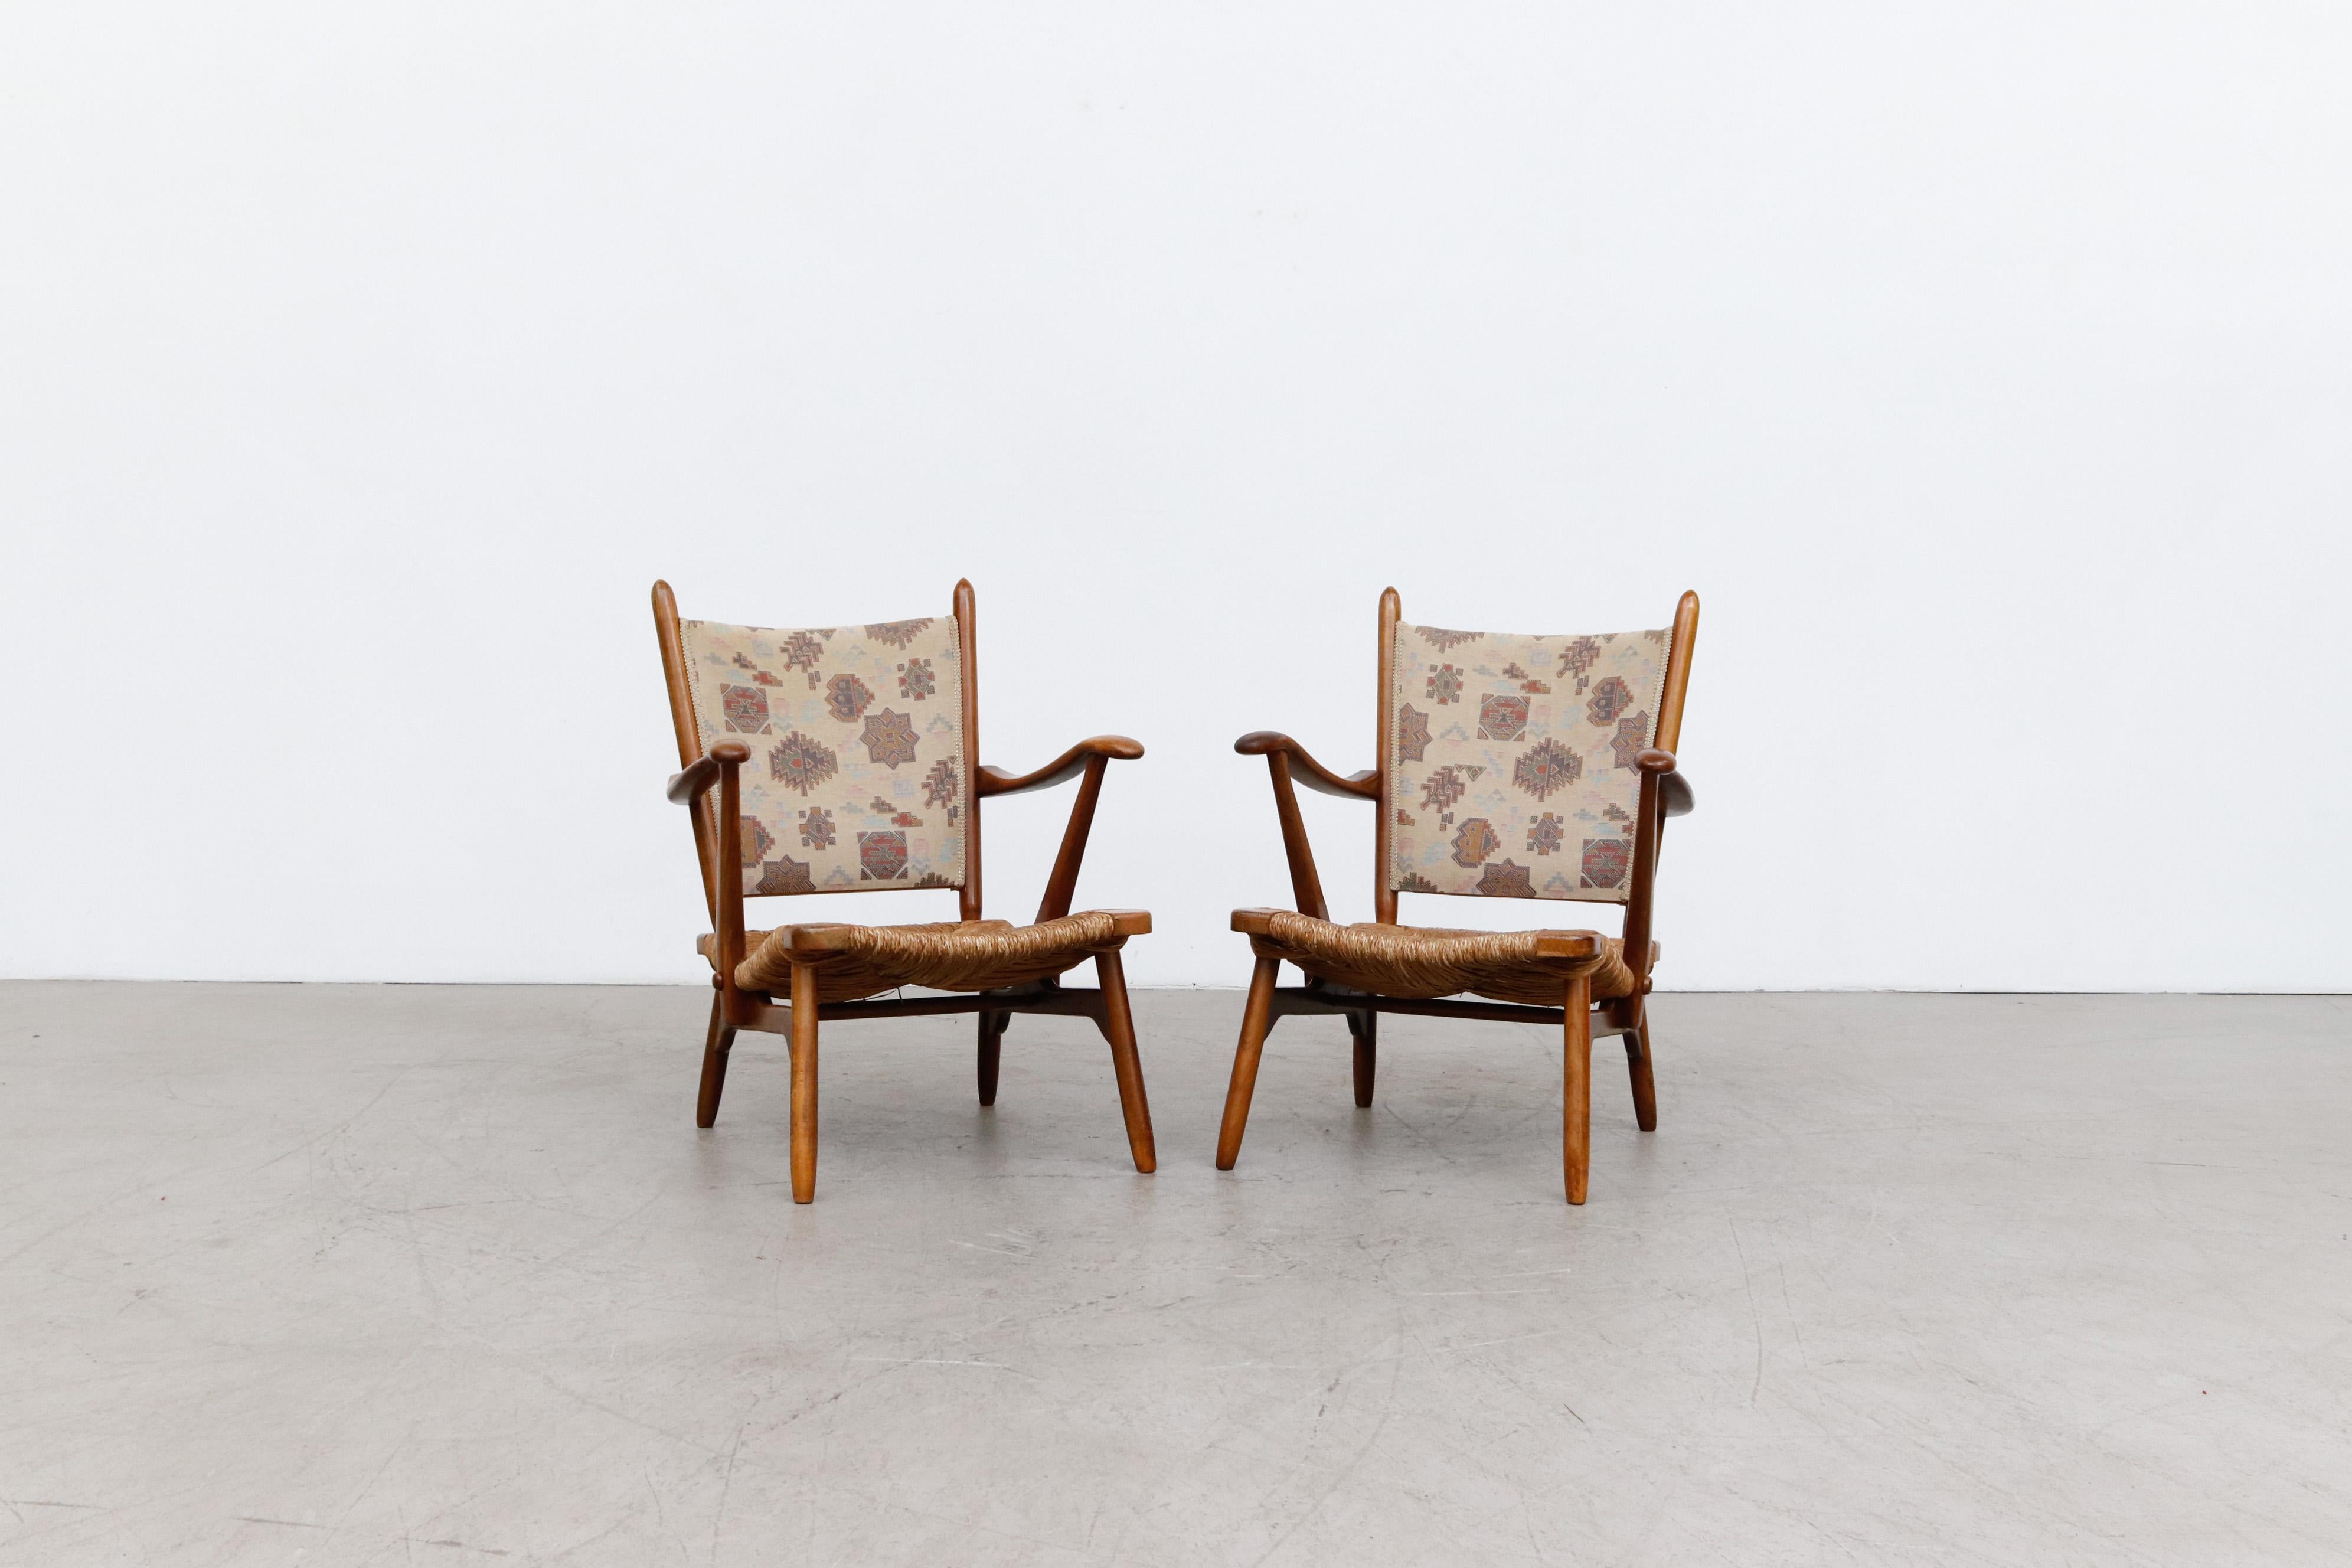 Pair of De Ster Gelderland upholstered lounge chairs with rush seats. Manufactured in the 1950s in the netherlands. Organically shaped armchairs with a hand woven rush seating. In original condition, wear consistent with its age and use.